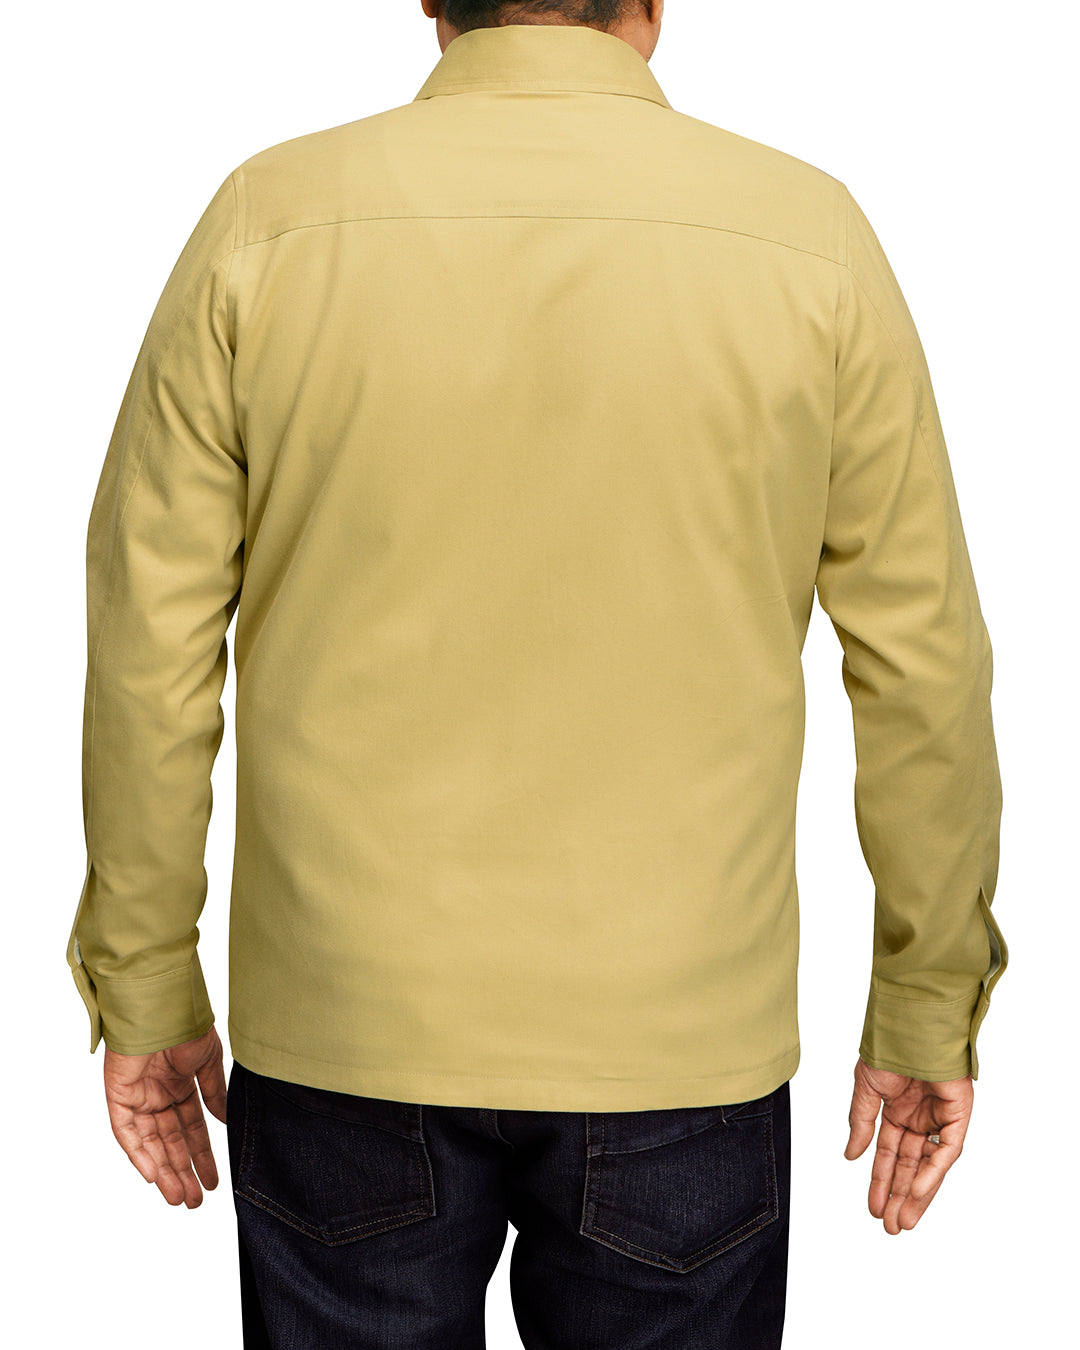 Back of model wearing the twill shirt jacket for men by Luxire in mellow mustard